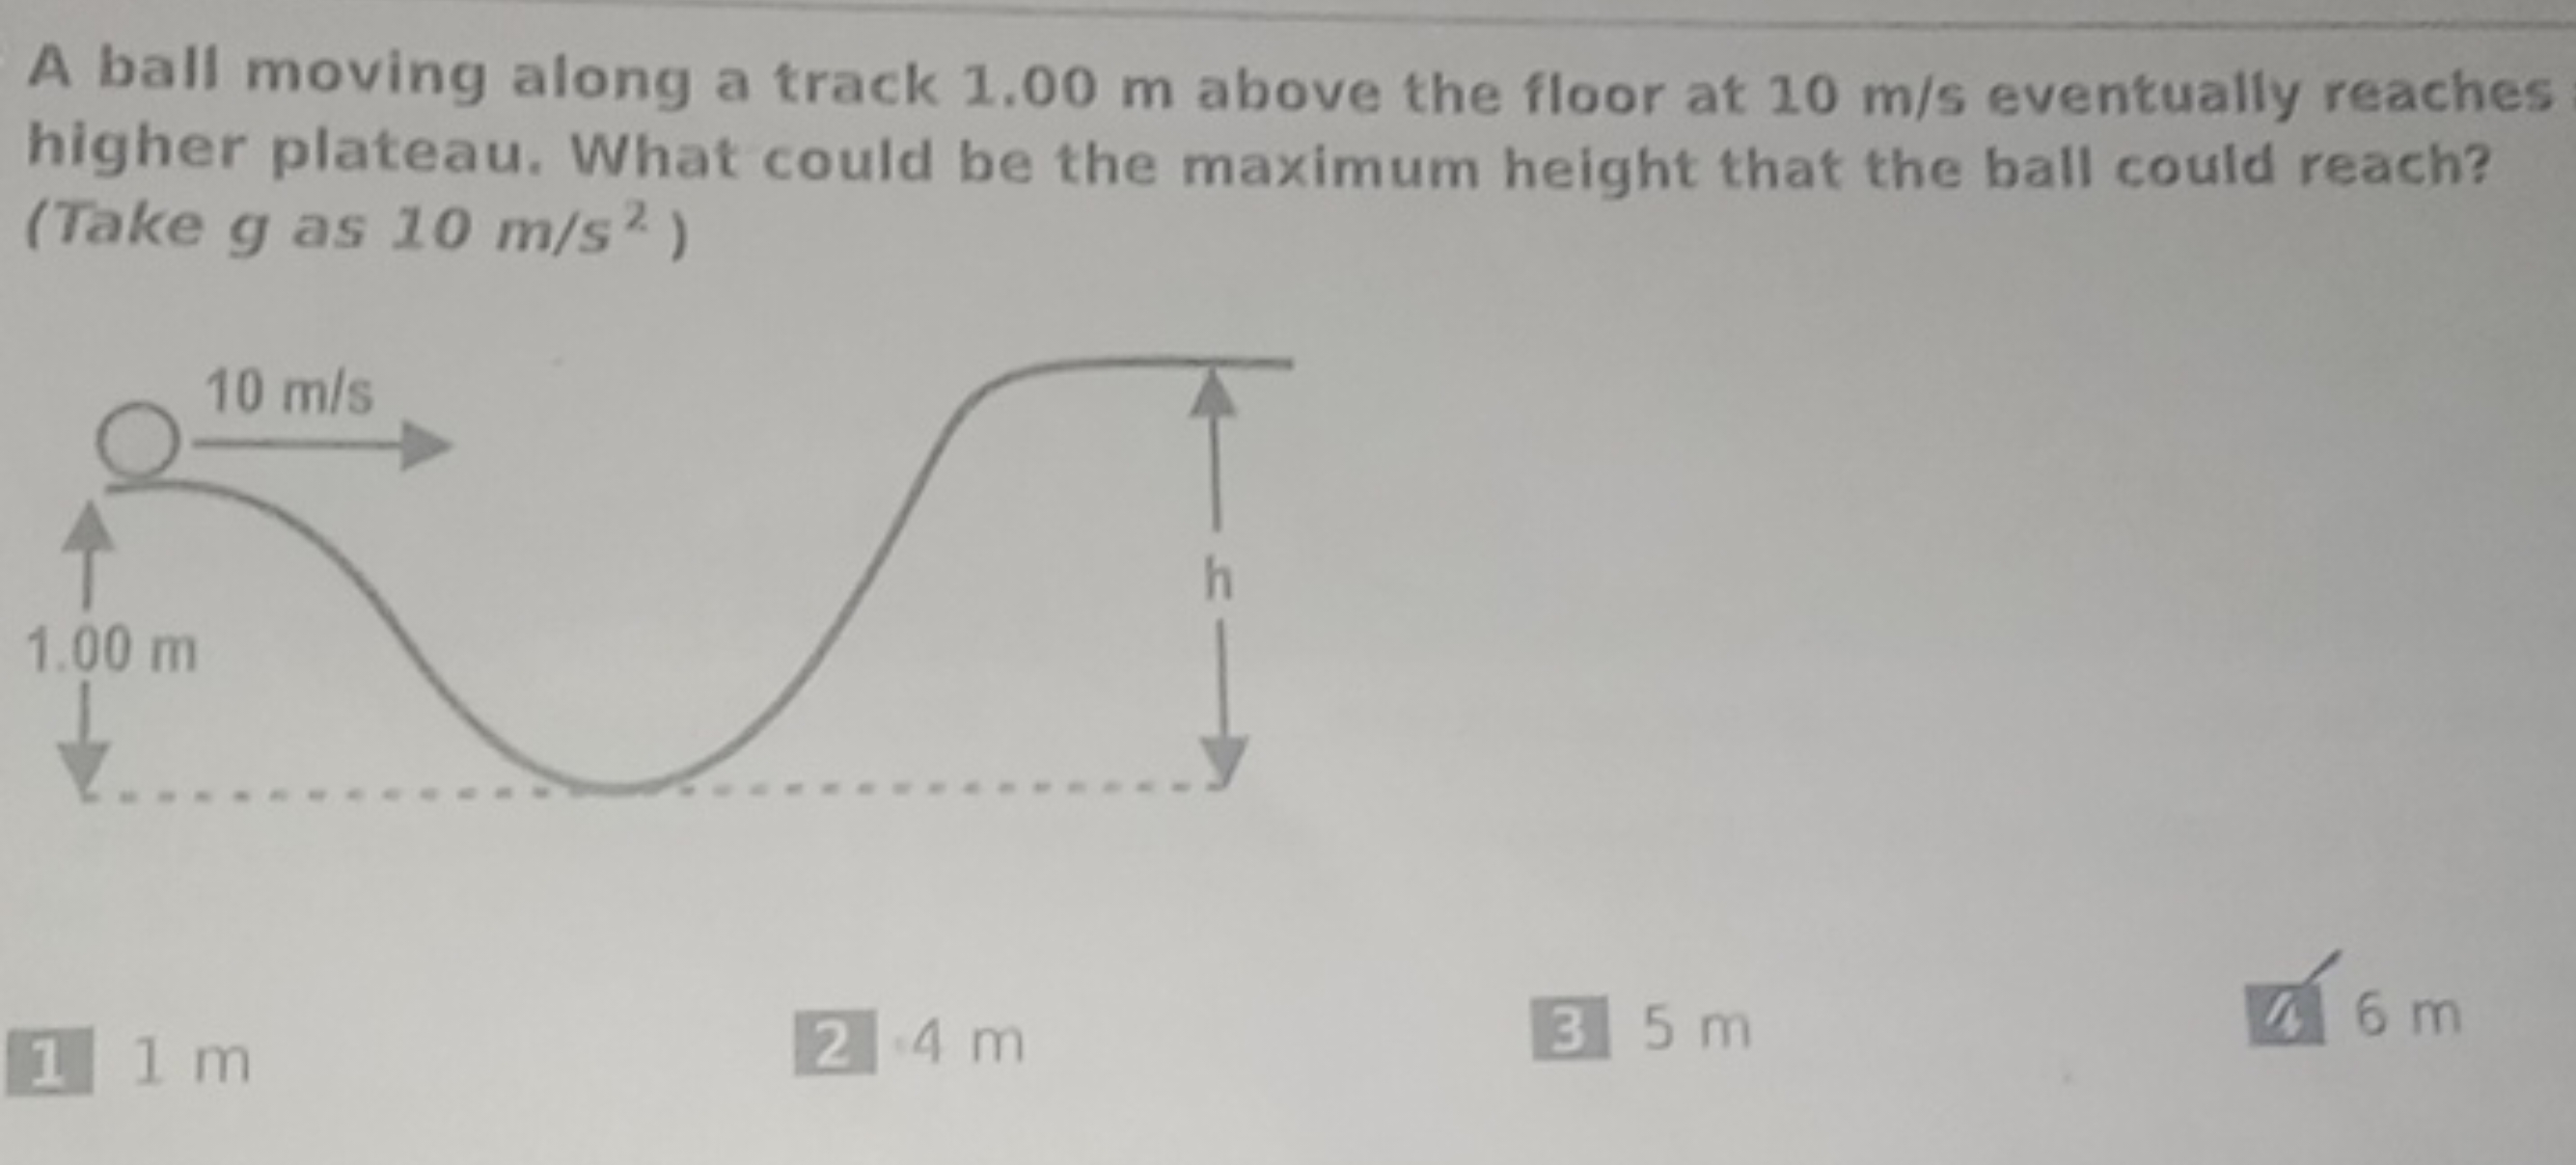 A ball moving along a track 1.00 m above the floor at 10 m/s eventuall